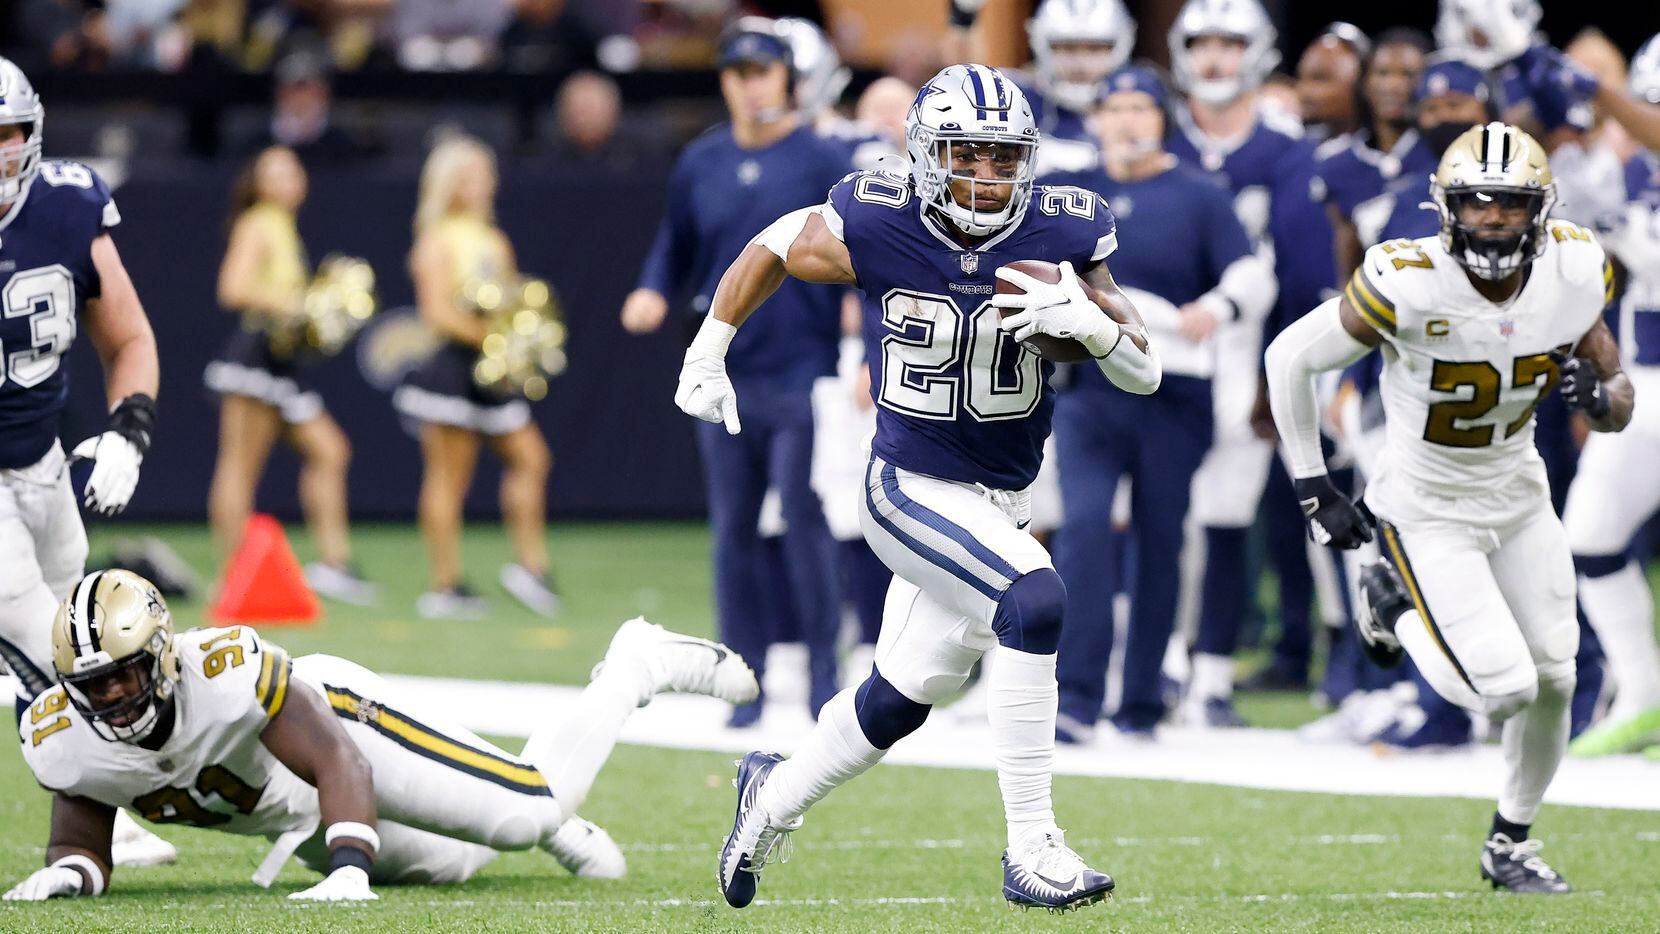 Dallas Cowboys running back Tony Pollard (20) breaks away from New Orleans Saints defensive tackle Josiah Bronson (91) enroute to a long touchdown run in the third quarter at the Caesars Superdome in New Orleans, Louisiana December 2, 2021. The Cowboys won 27-17.